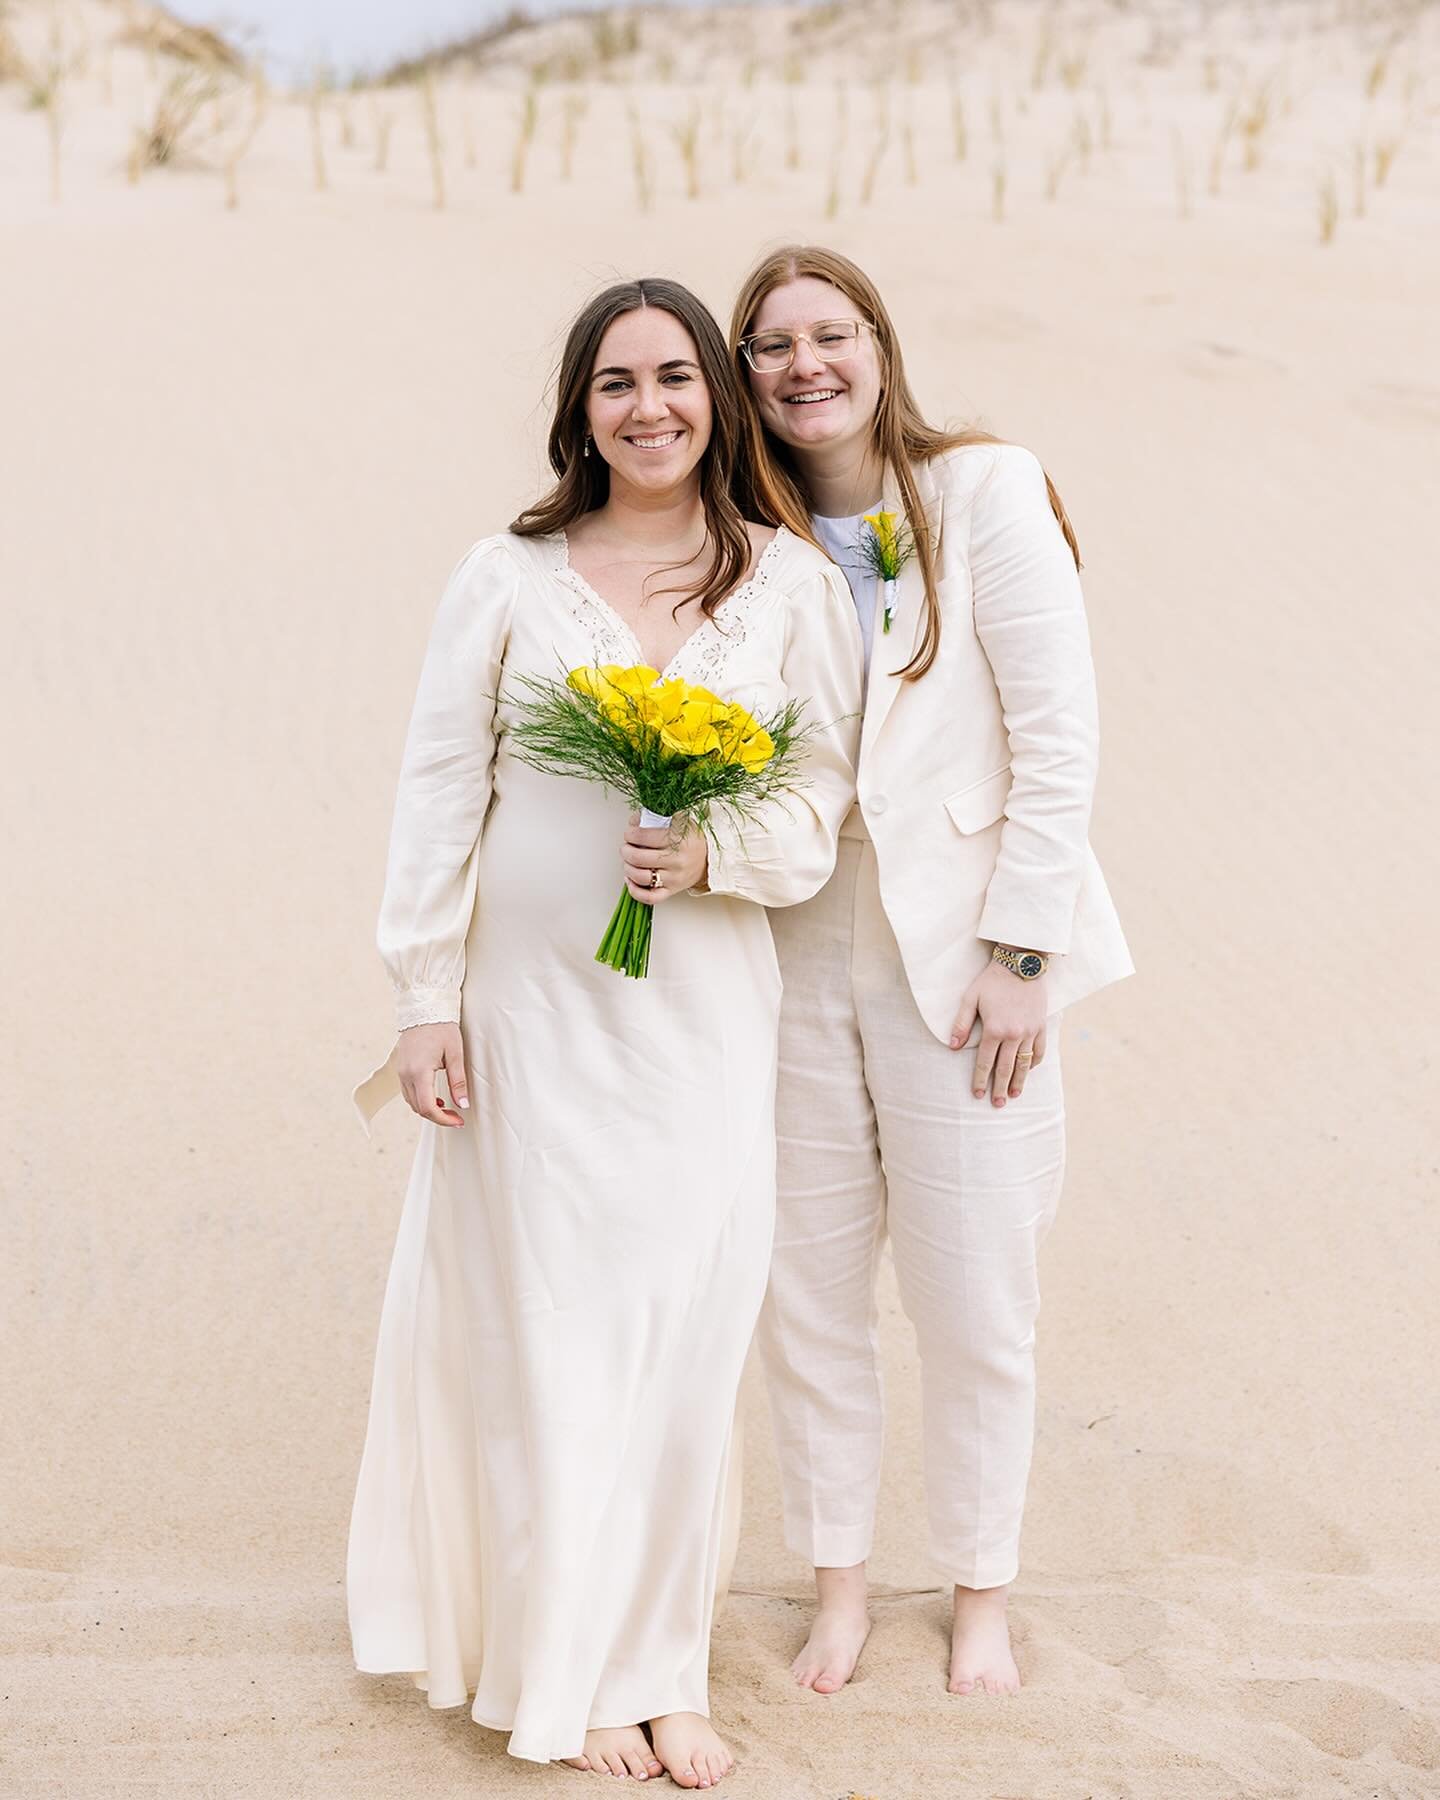 Saturday afternoon I spent the afternoon in Fenwick Island, Delaware to celebrate Julia + Caroline&rsquo;s wedding! They got married on the dock steps away from their beach house and then we did a few portraits on the beach before returning home for 